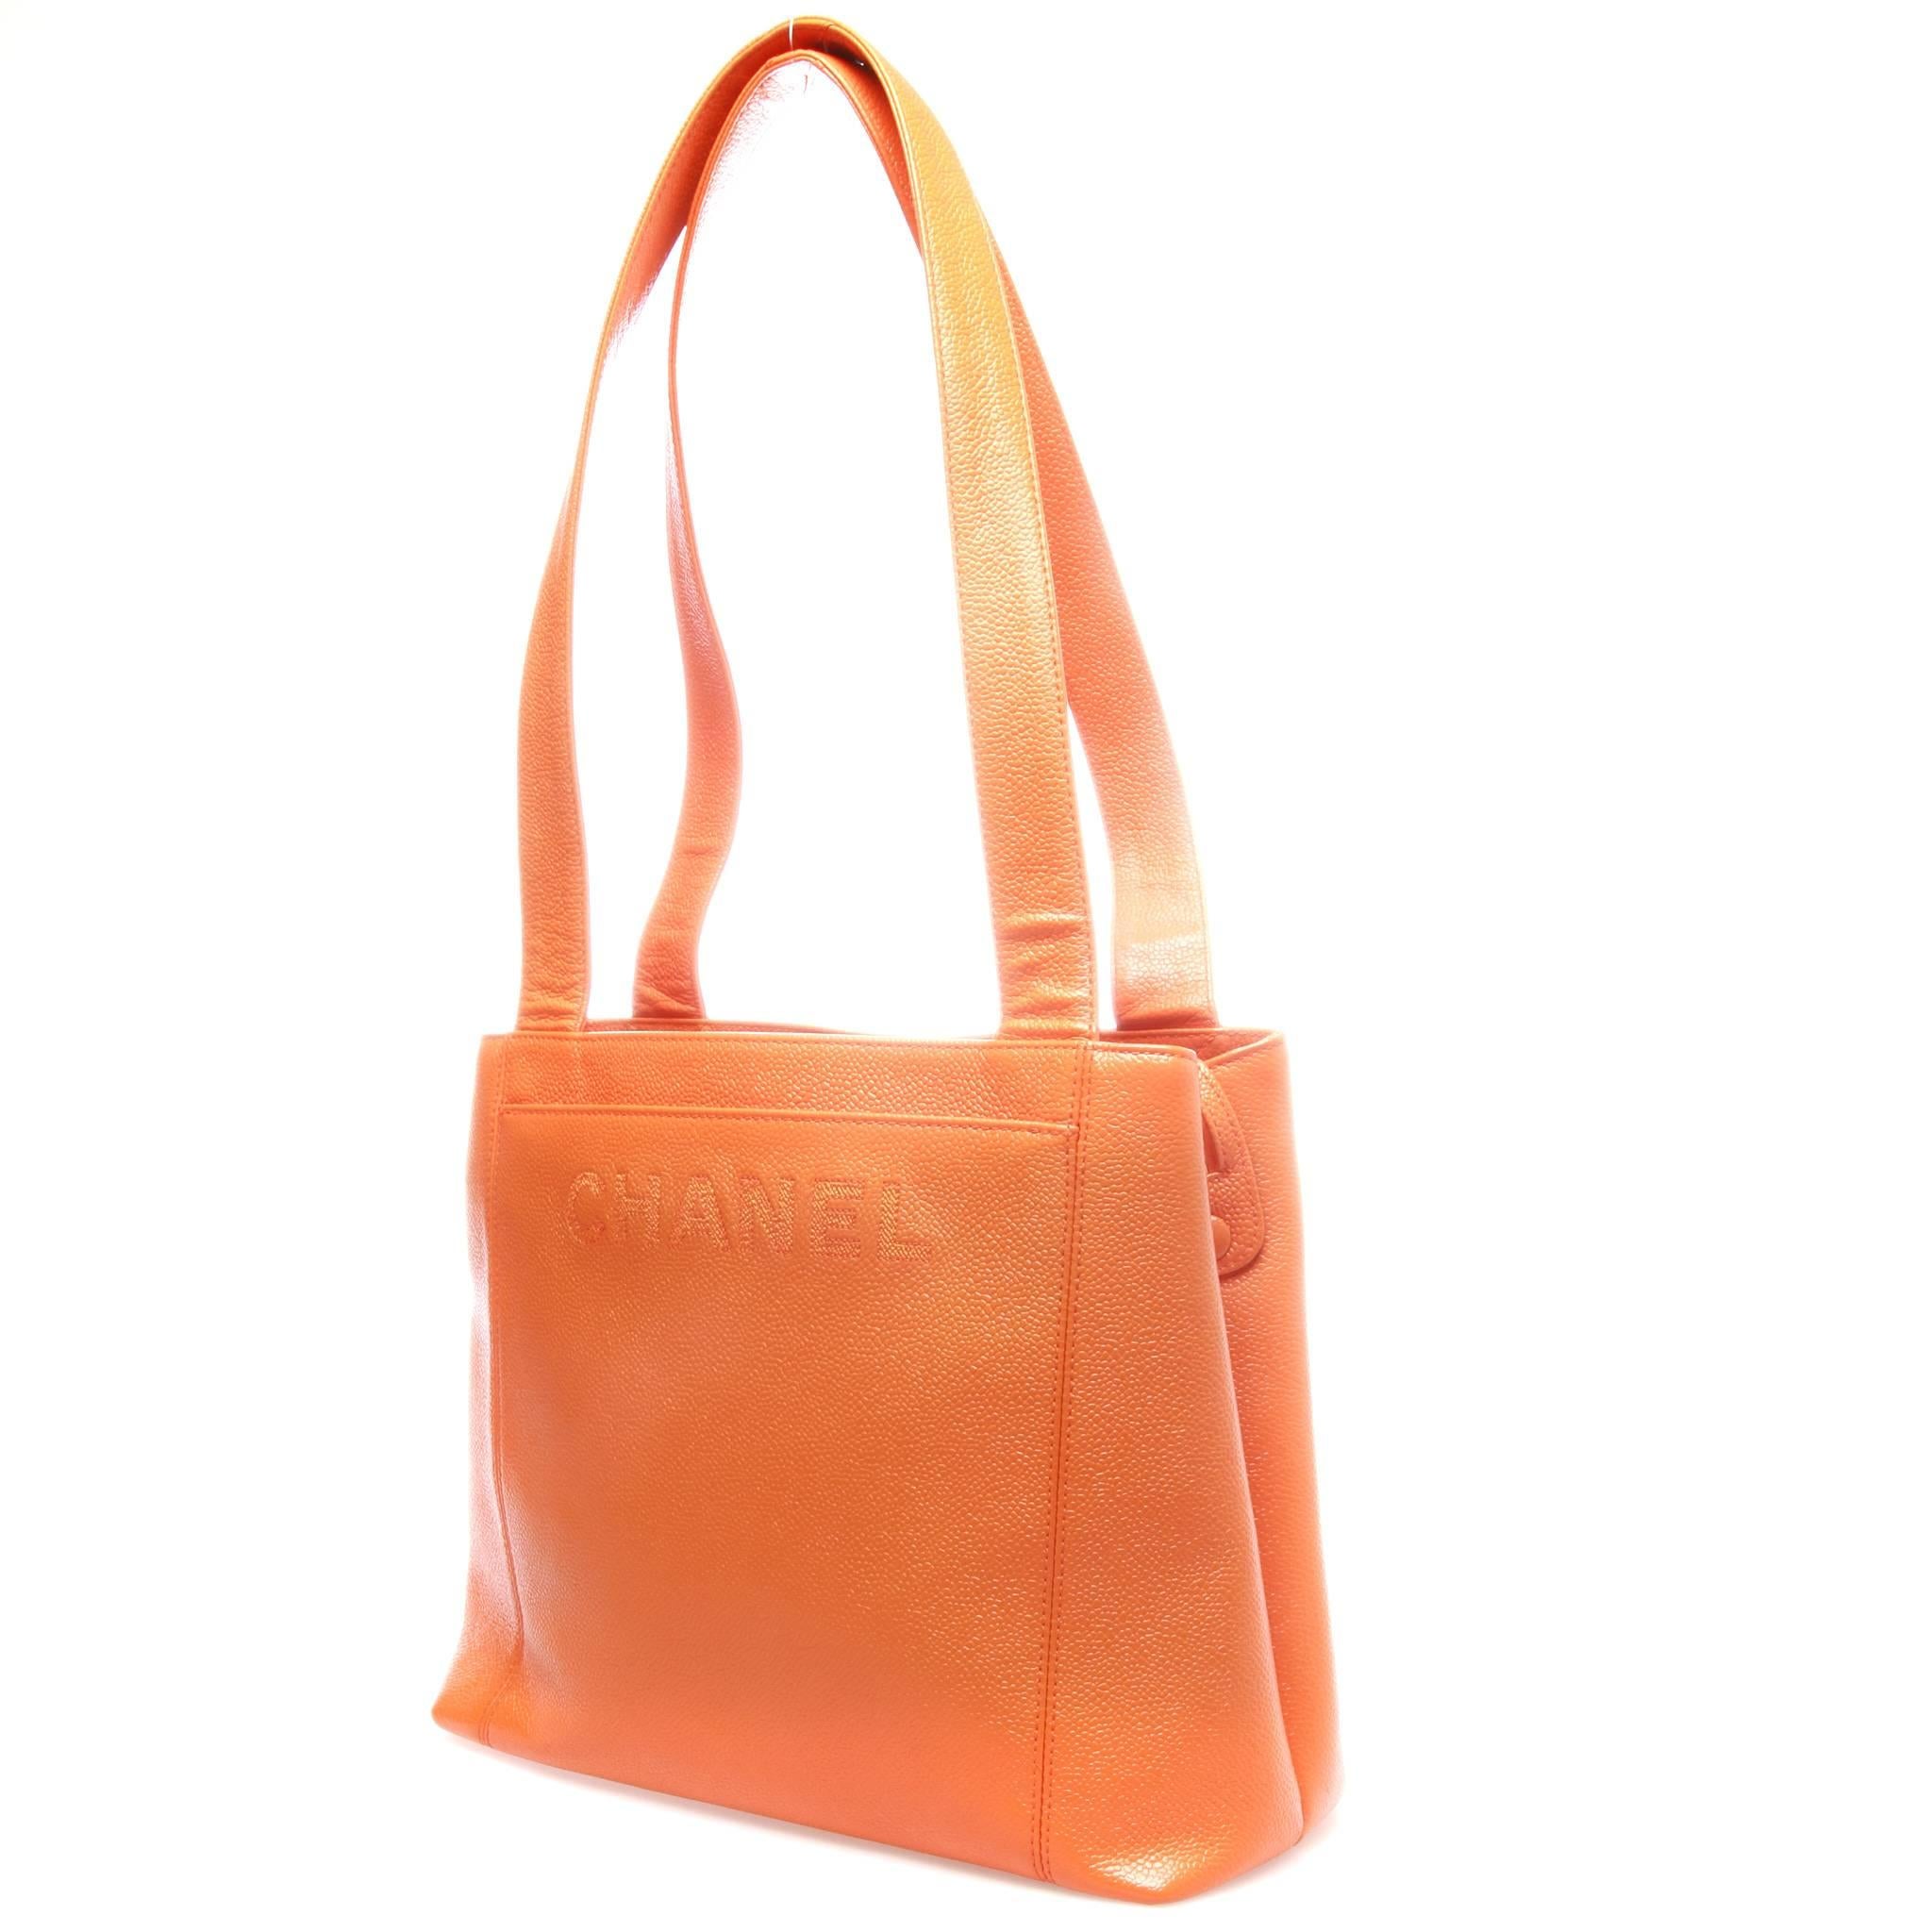 FINAL SALE
Madam Virtue & Co

Immaculate condition orange caviar leather chanel tote with gold-tone hardware, dual flat shoulder straps, dual exterior pockets, embroidered logo at front, matching orange grosgrain lining, dual open interior pockets